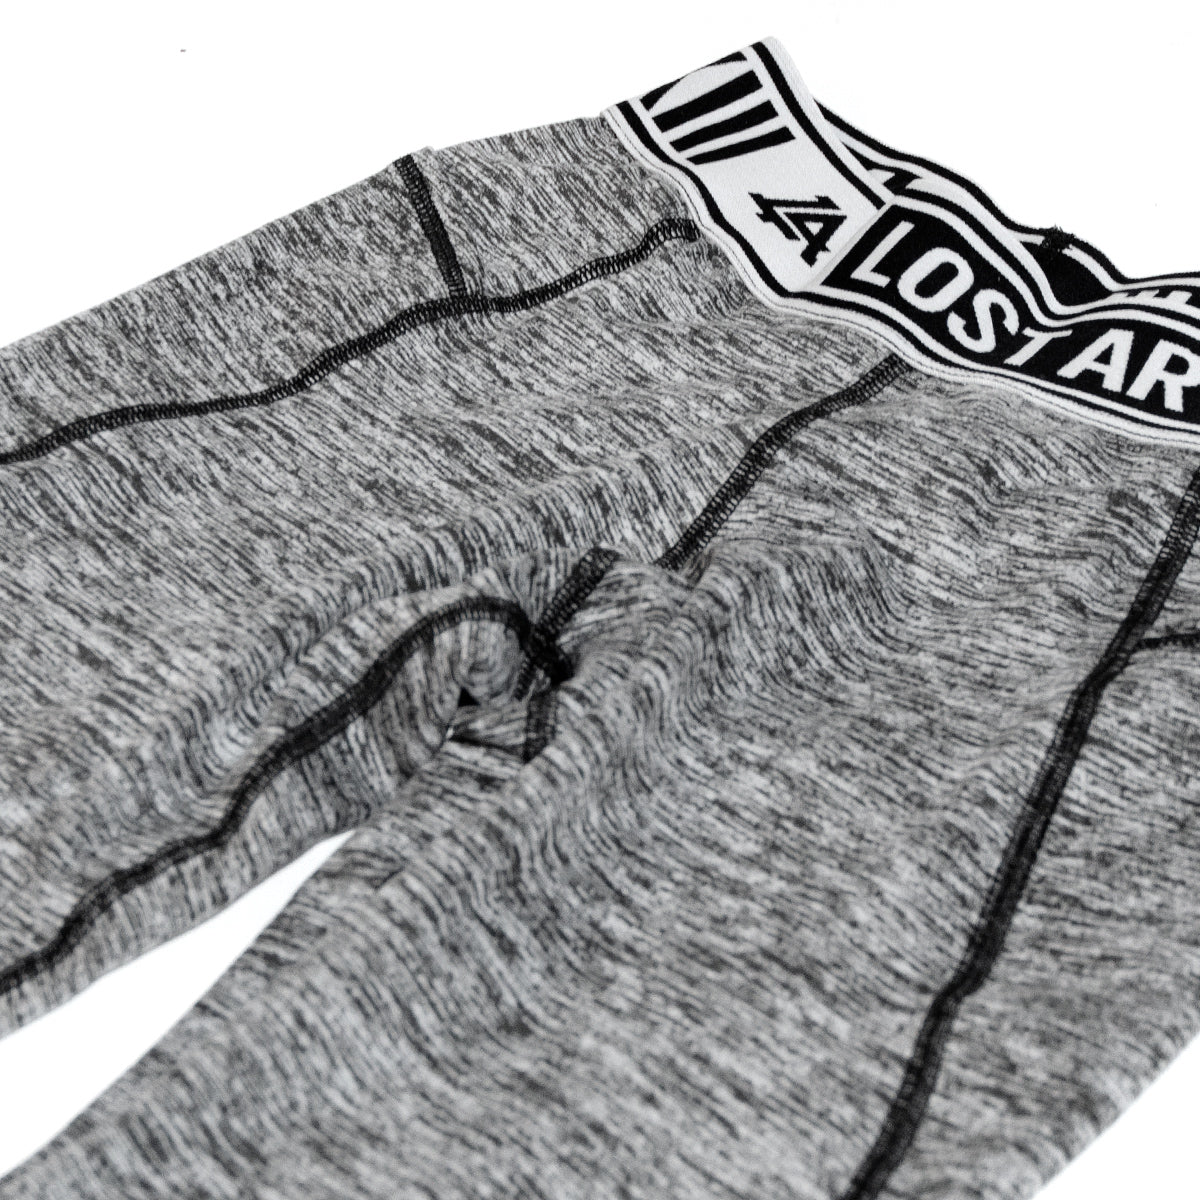 Lost Art Canada - heathered grey and black leggings close up view